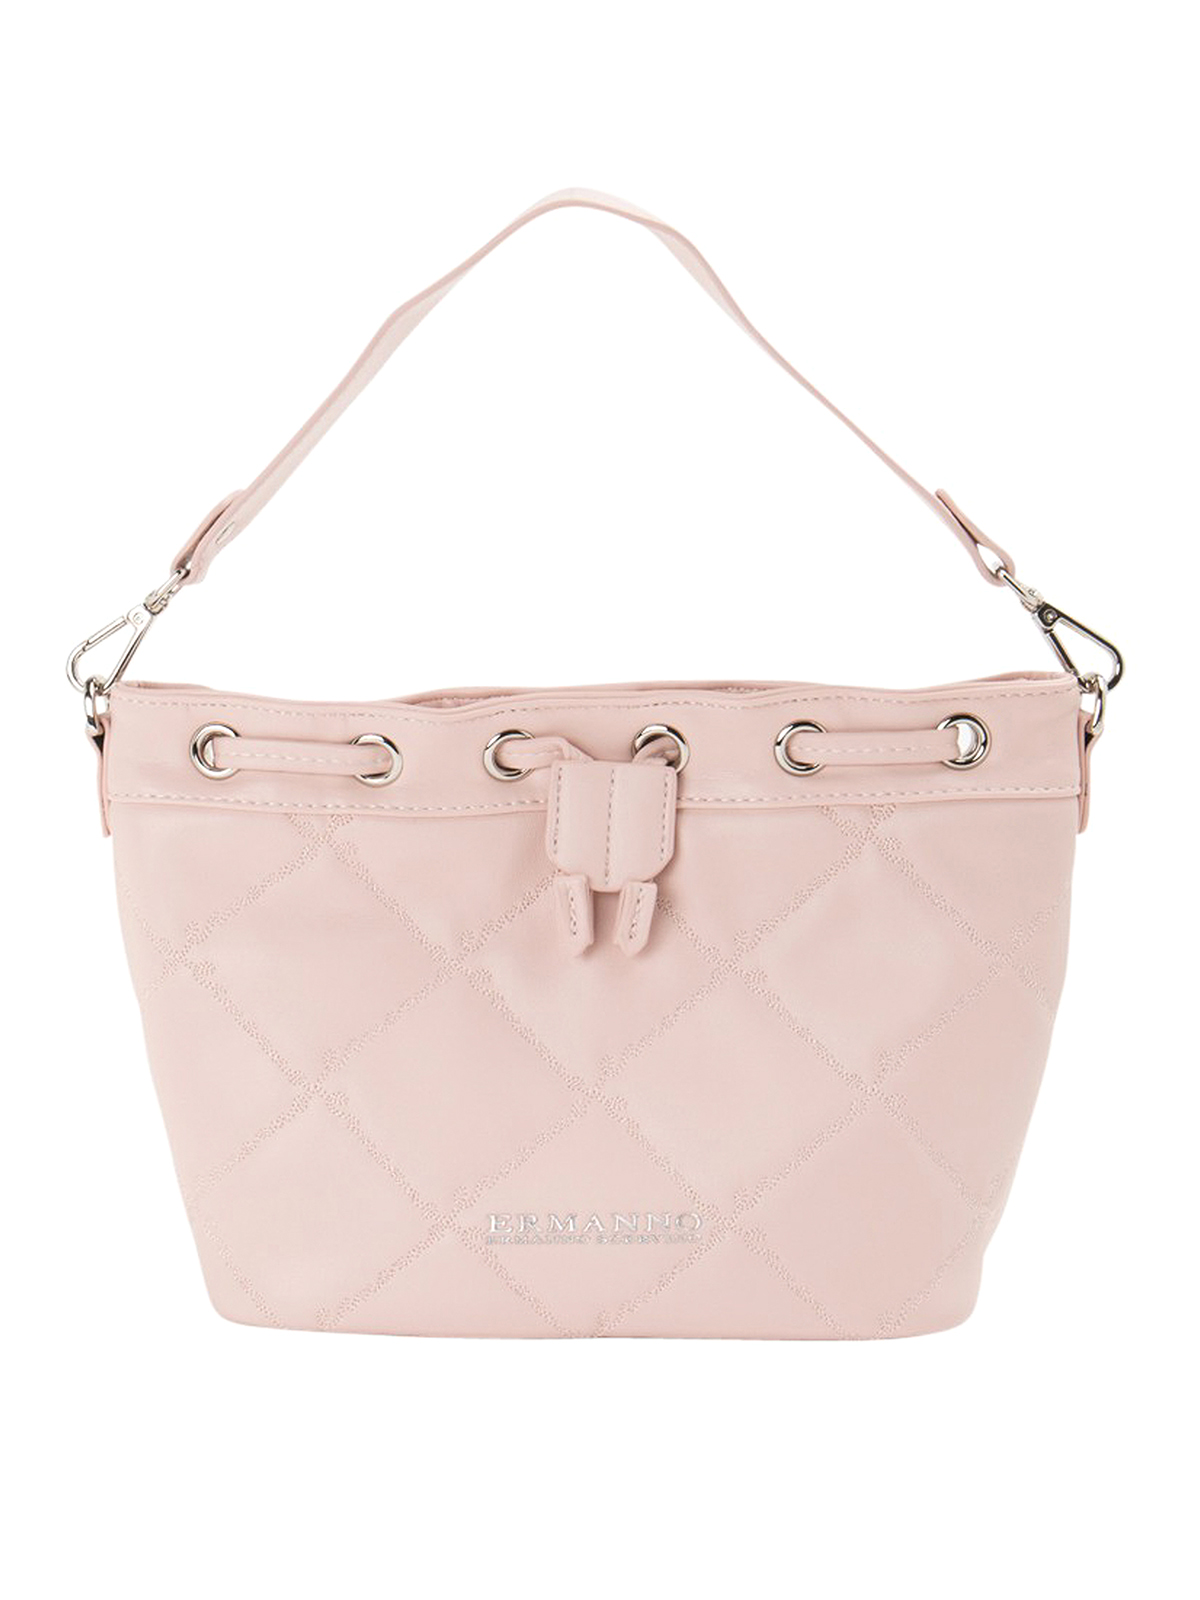 ERMANNO SCERVINO DIAMOND QUILTED FAUX LEATHER BUCKET